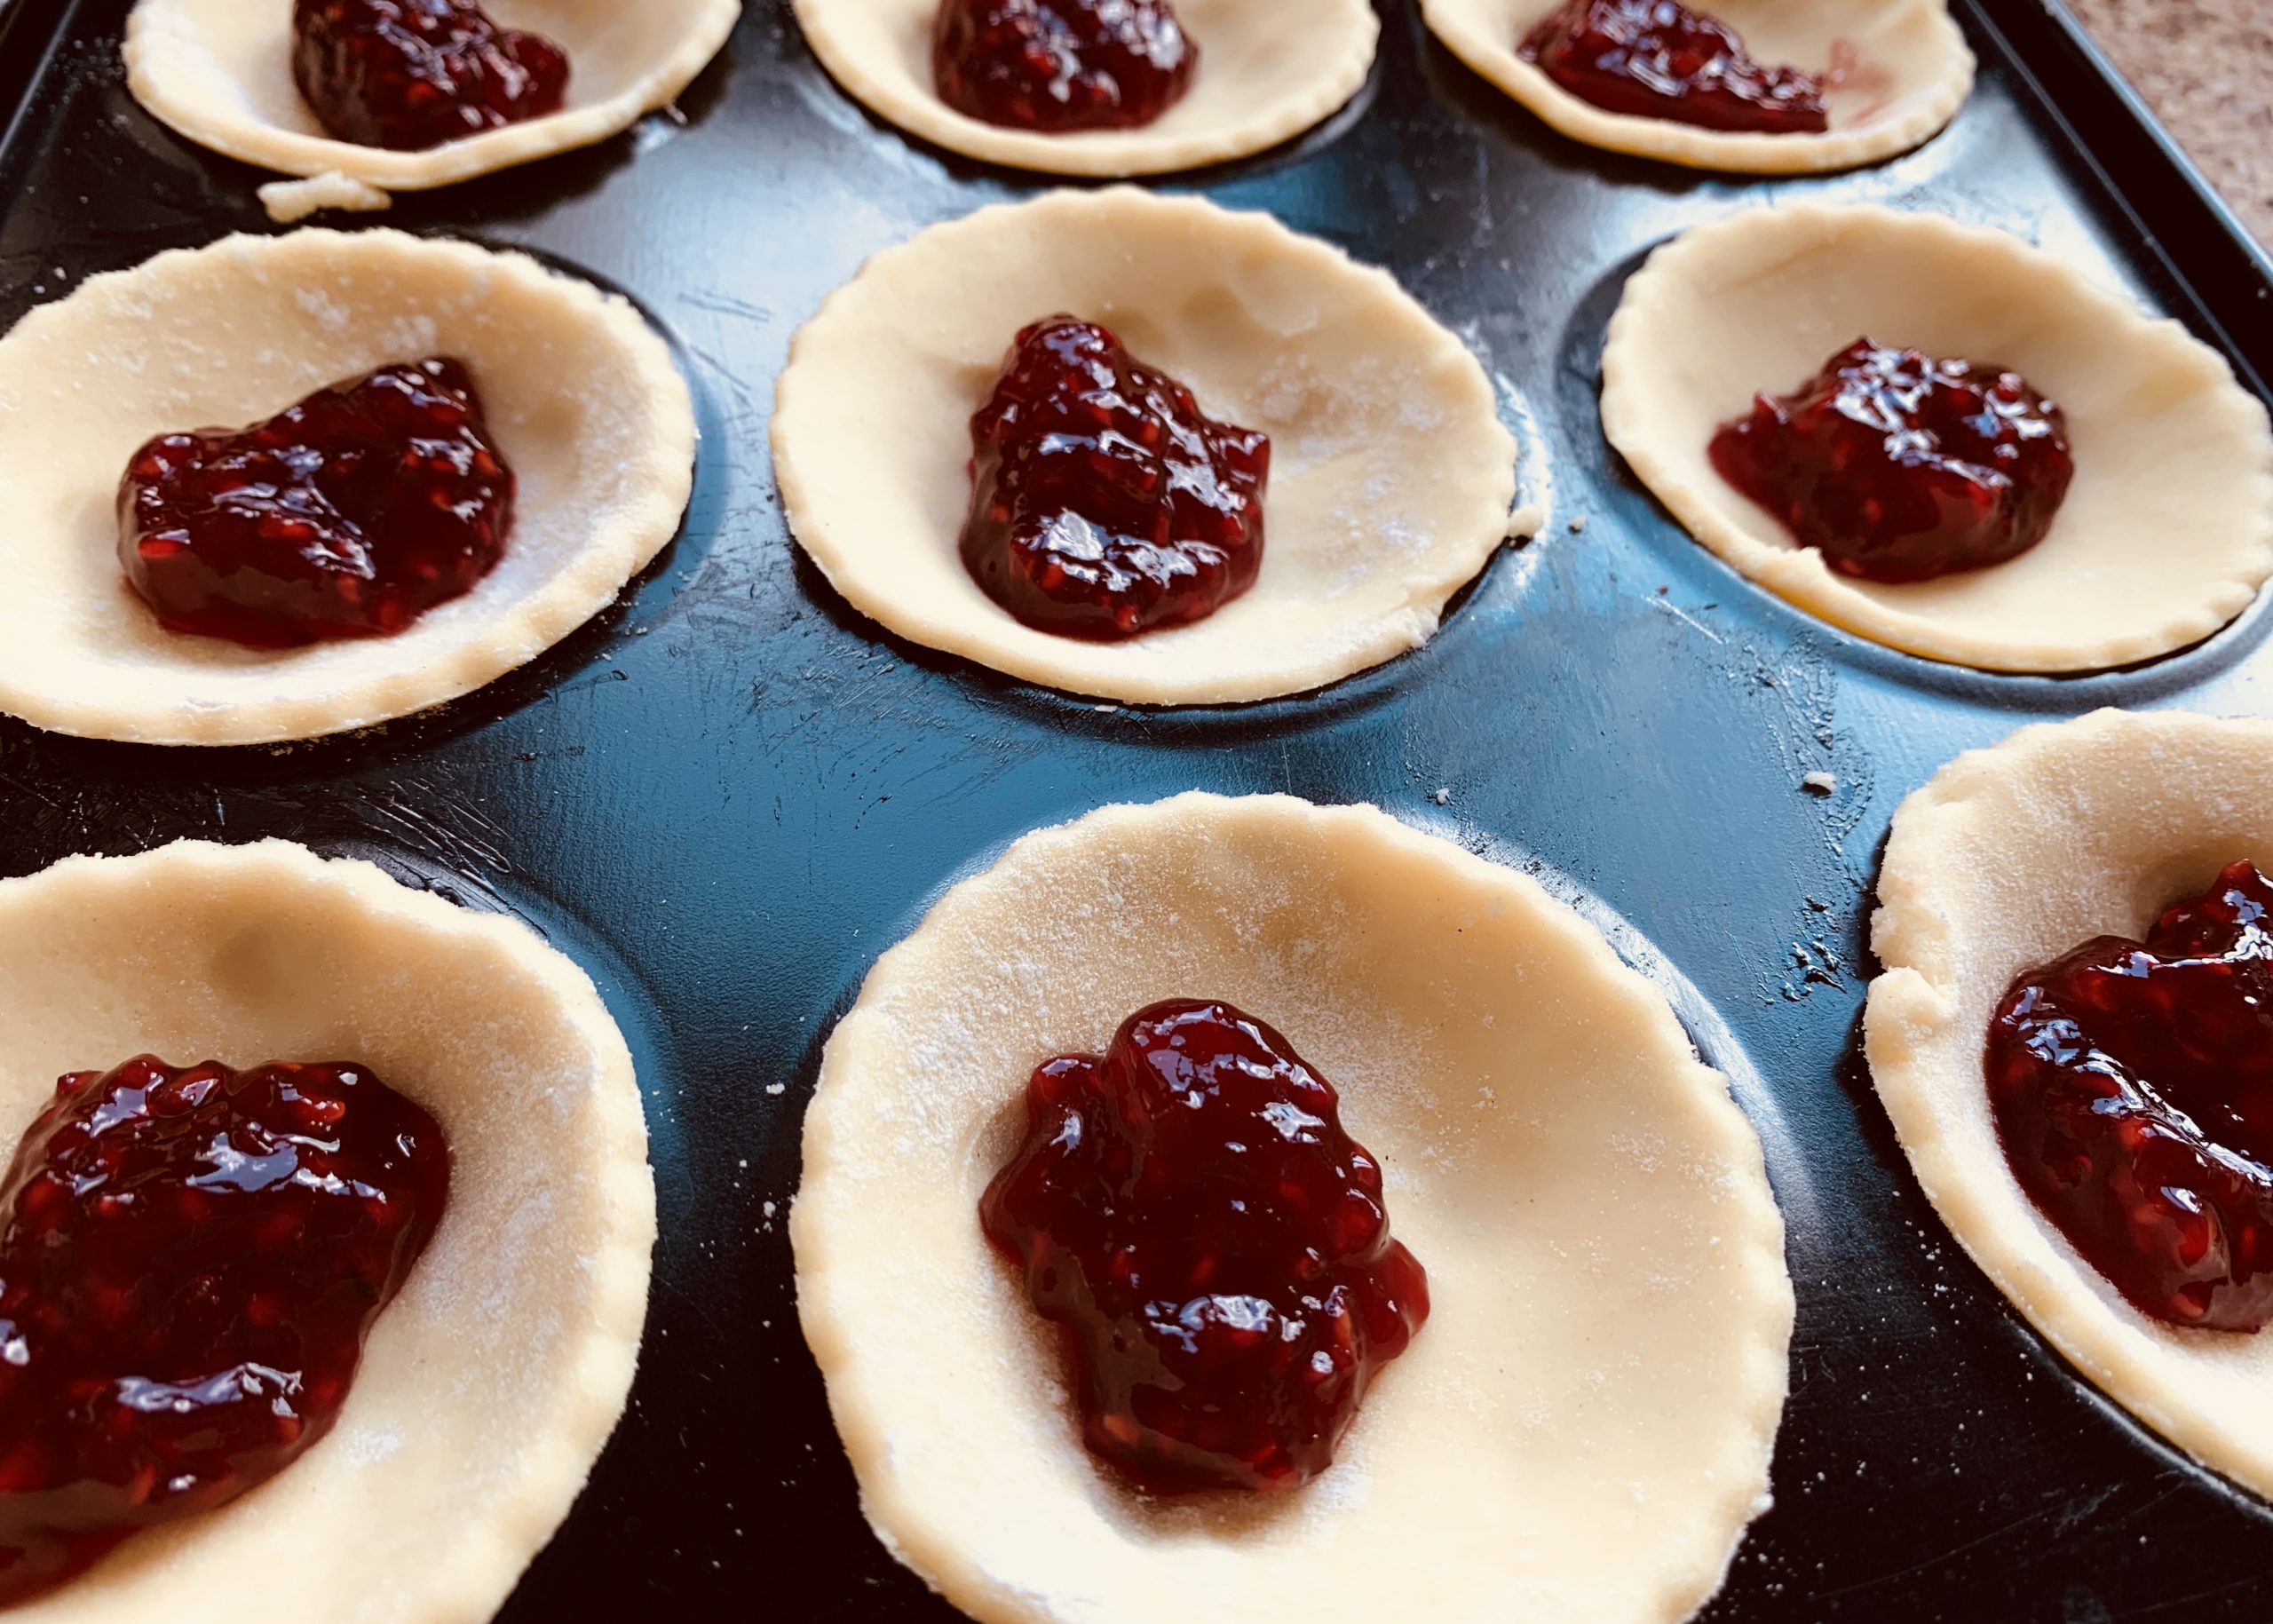 Gluten free pastry tarts filled with jam